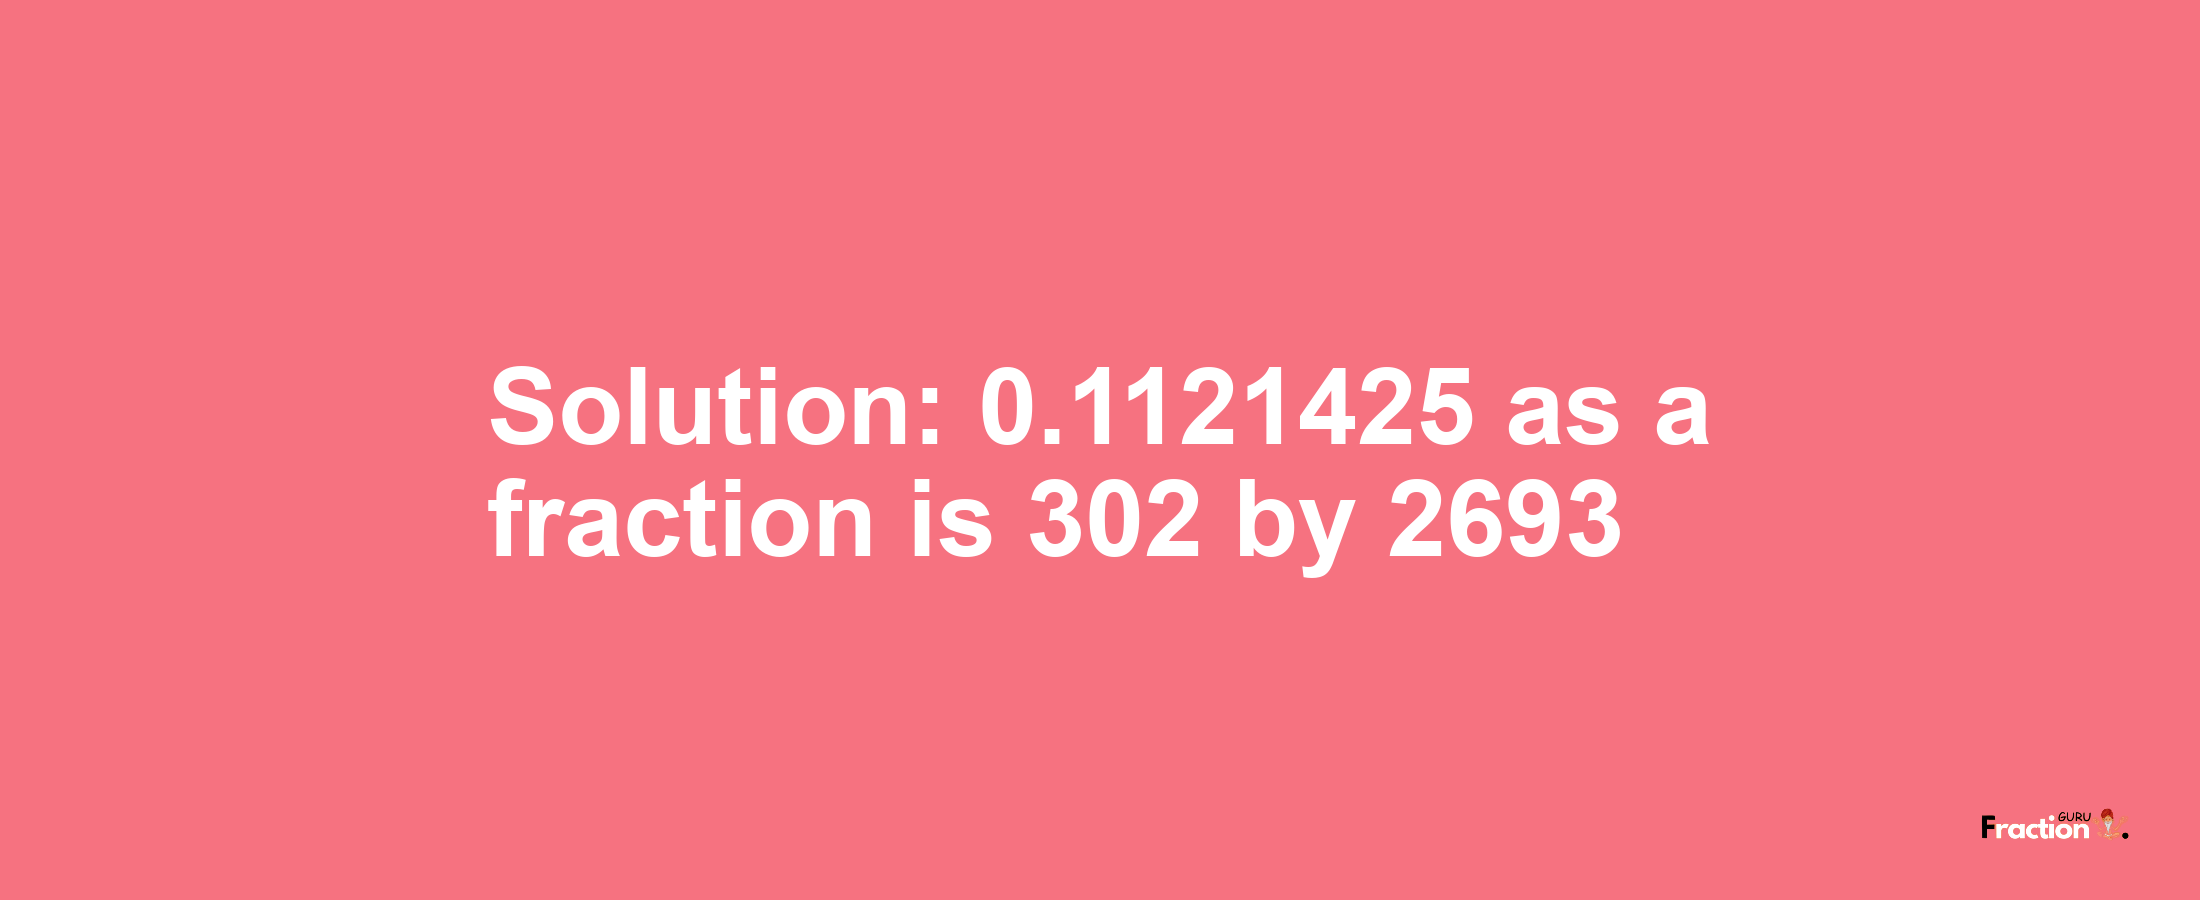 Solution:0.1121425 as a fraction is 302/2693